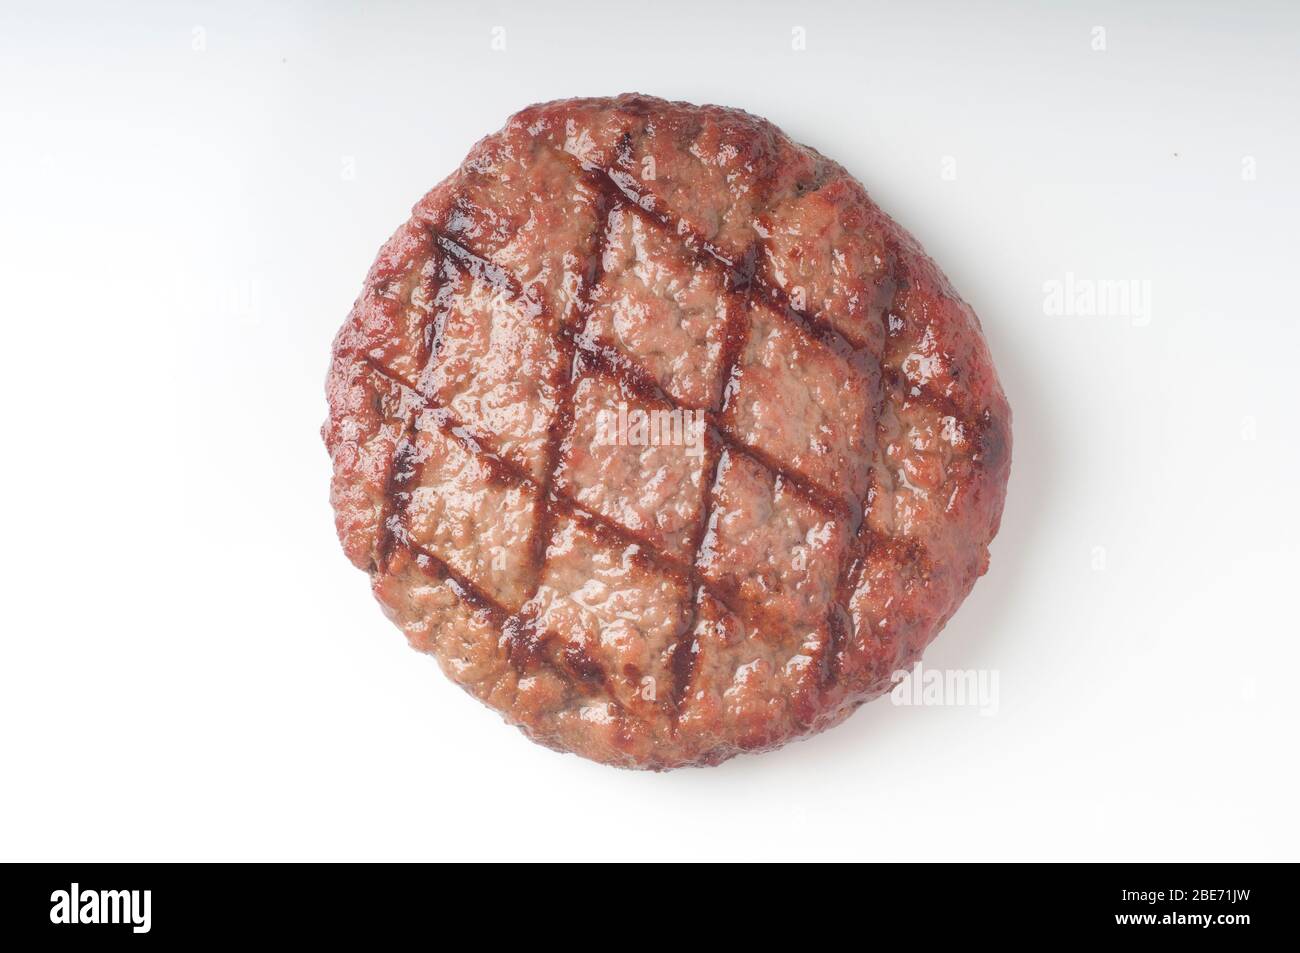 tasty grilled beef burger on a white background for graphic design Stock Photo